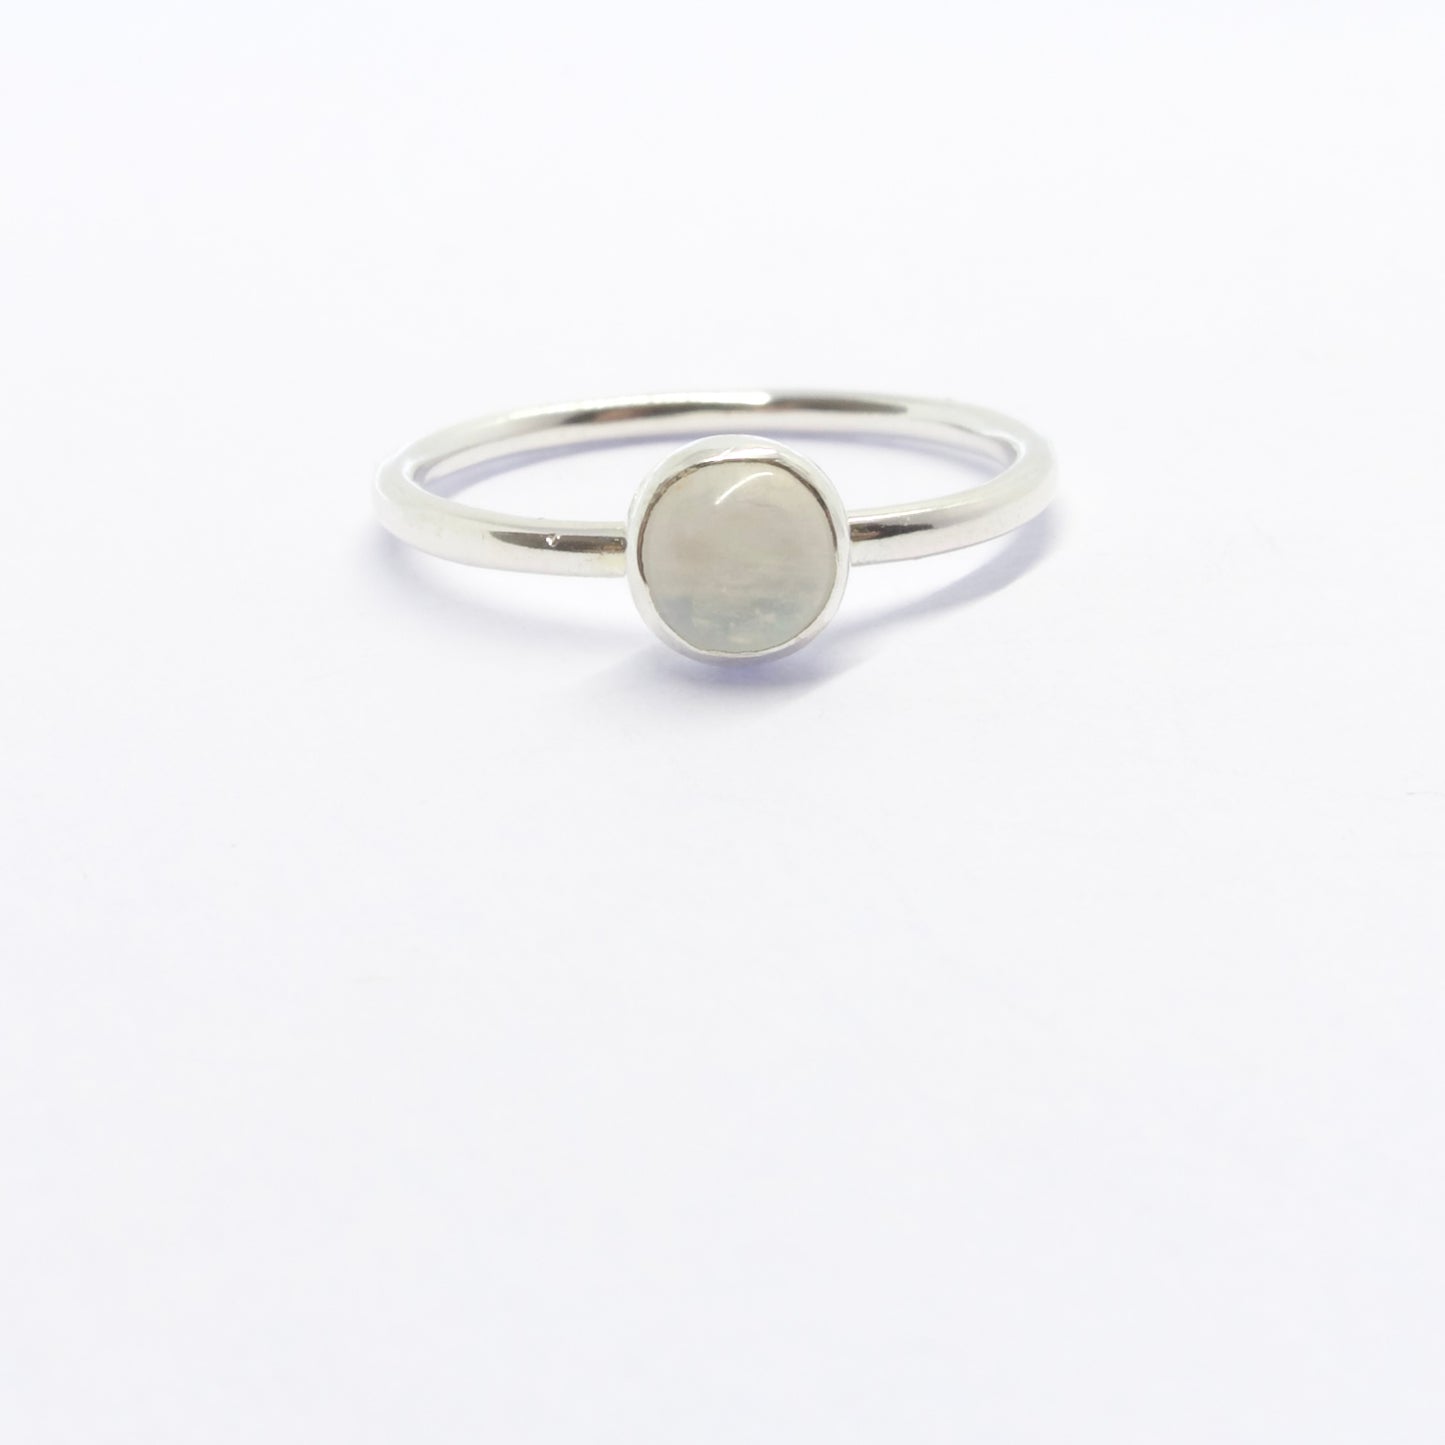 'Friendship/Connection' Moonstone Stacking Ring